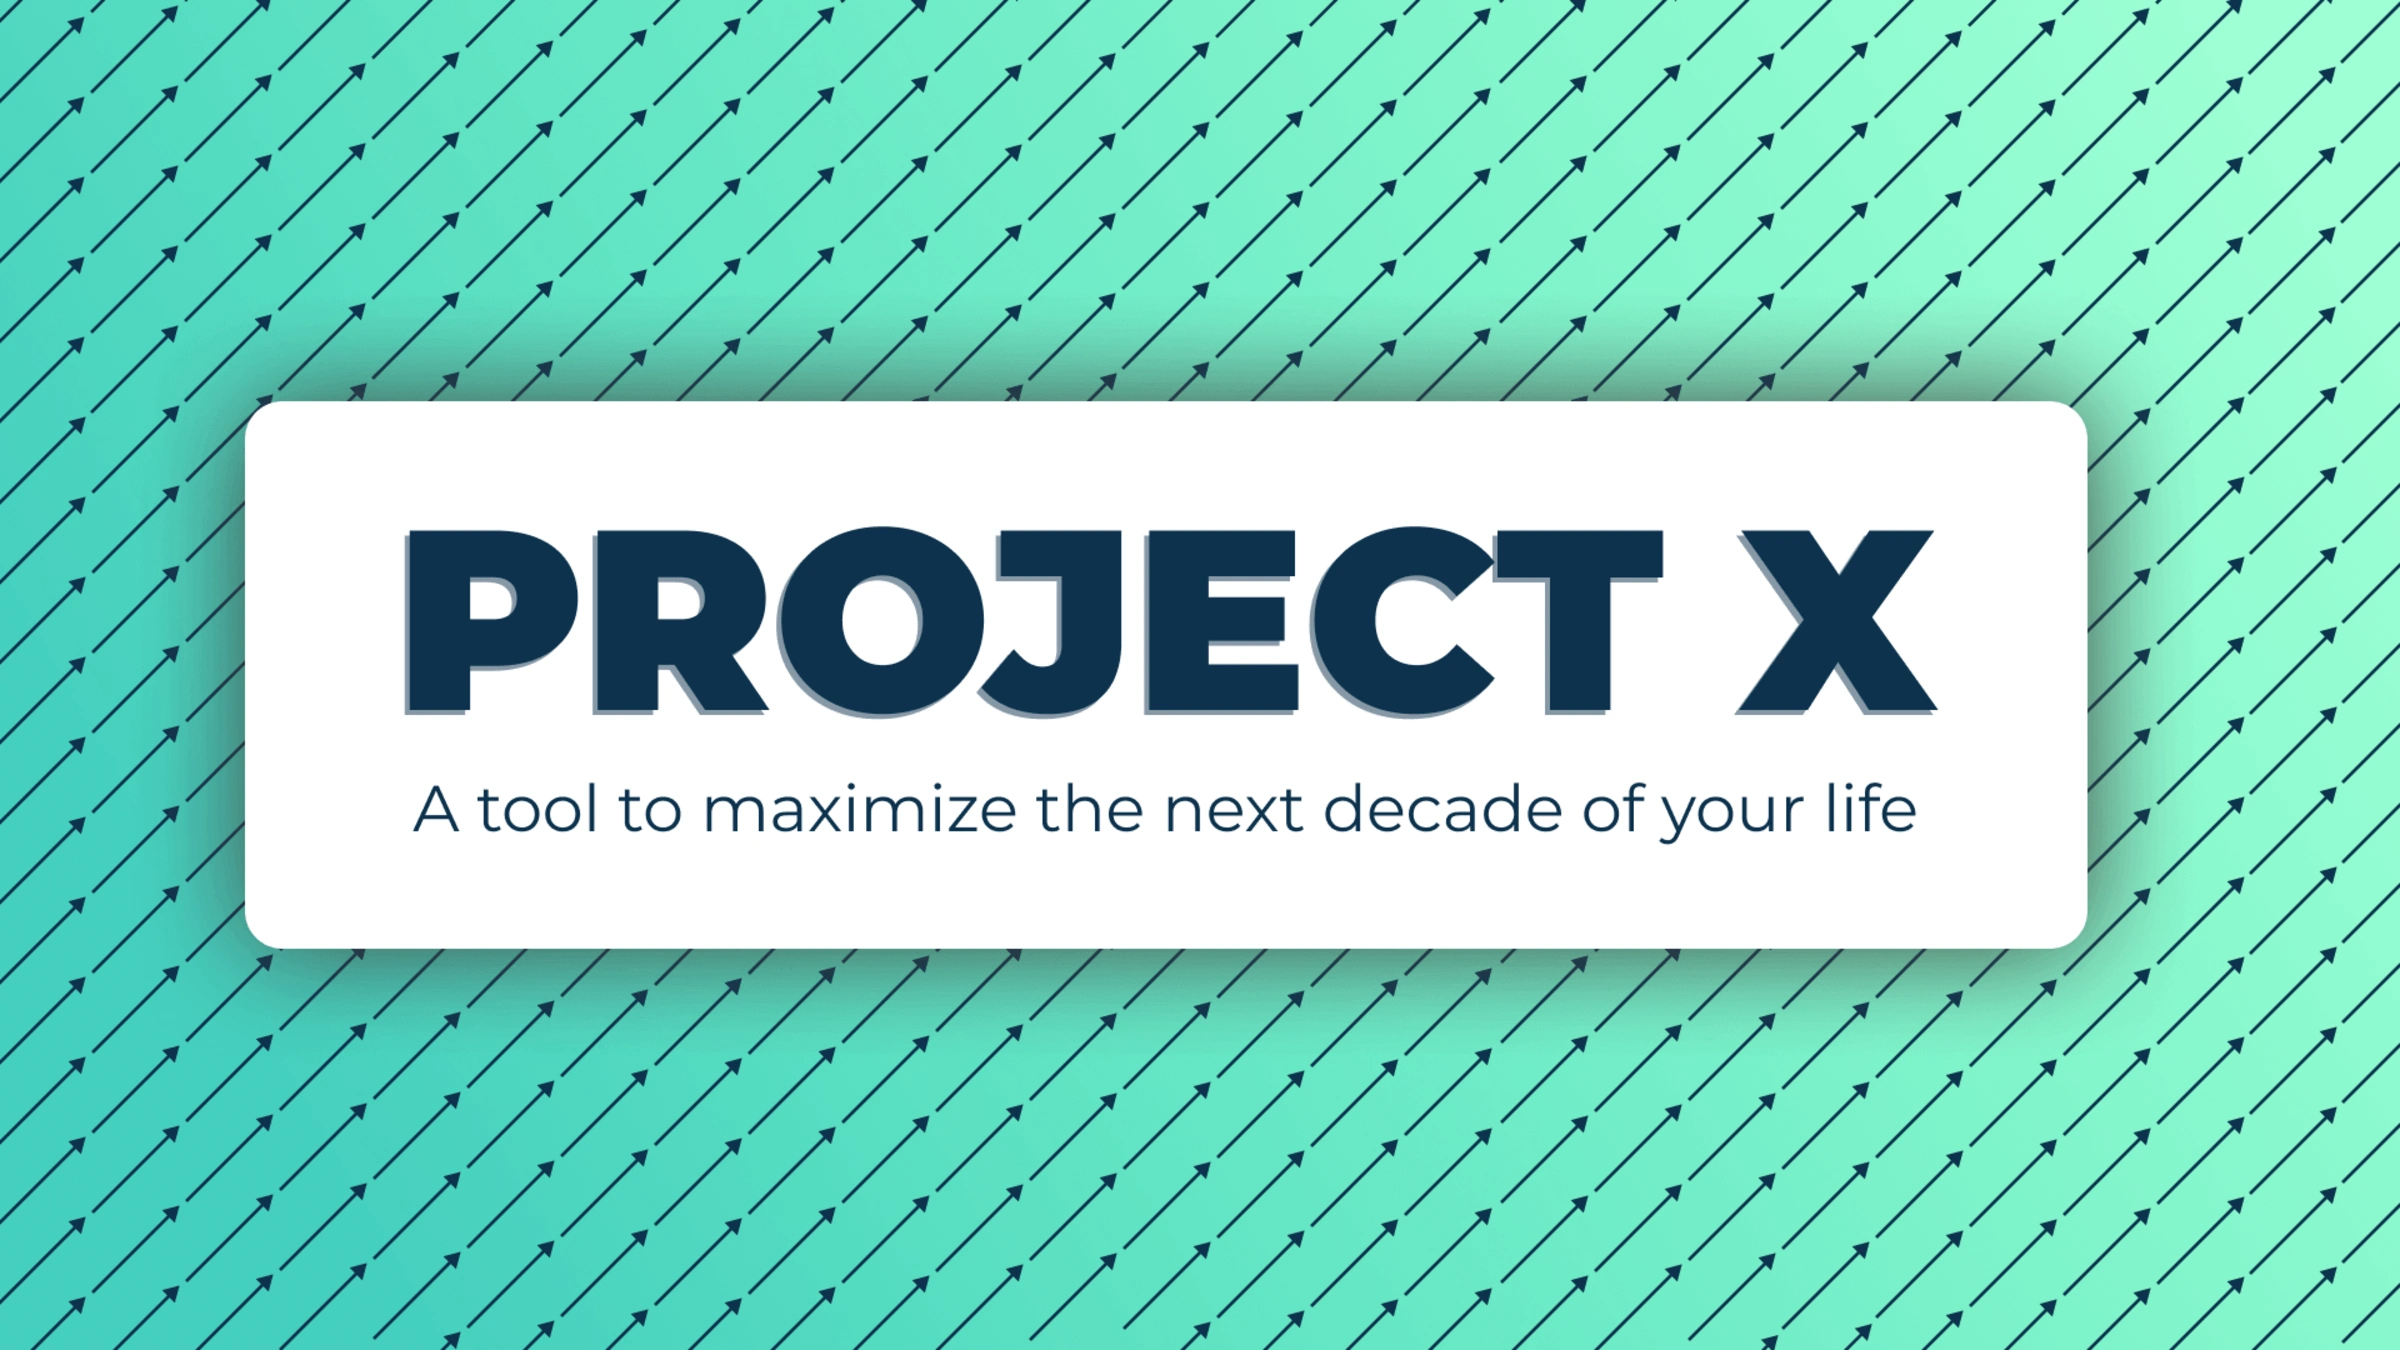 Project X – A tool to maximize the next decade of your life